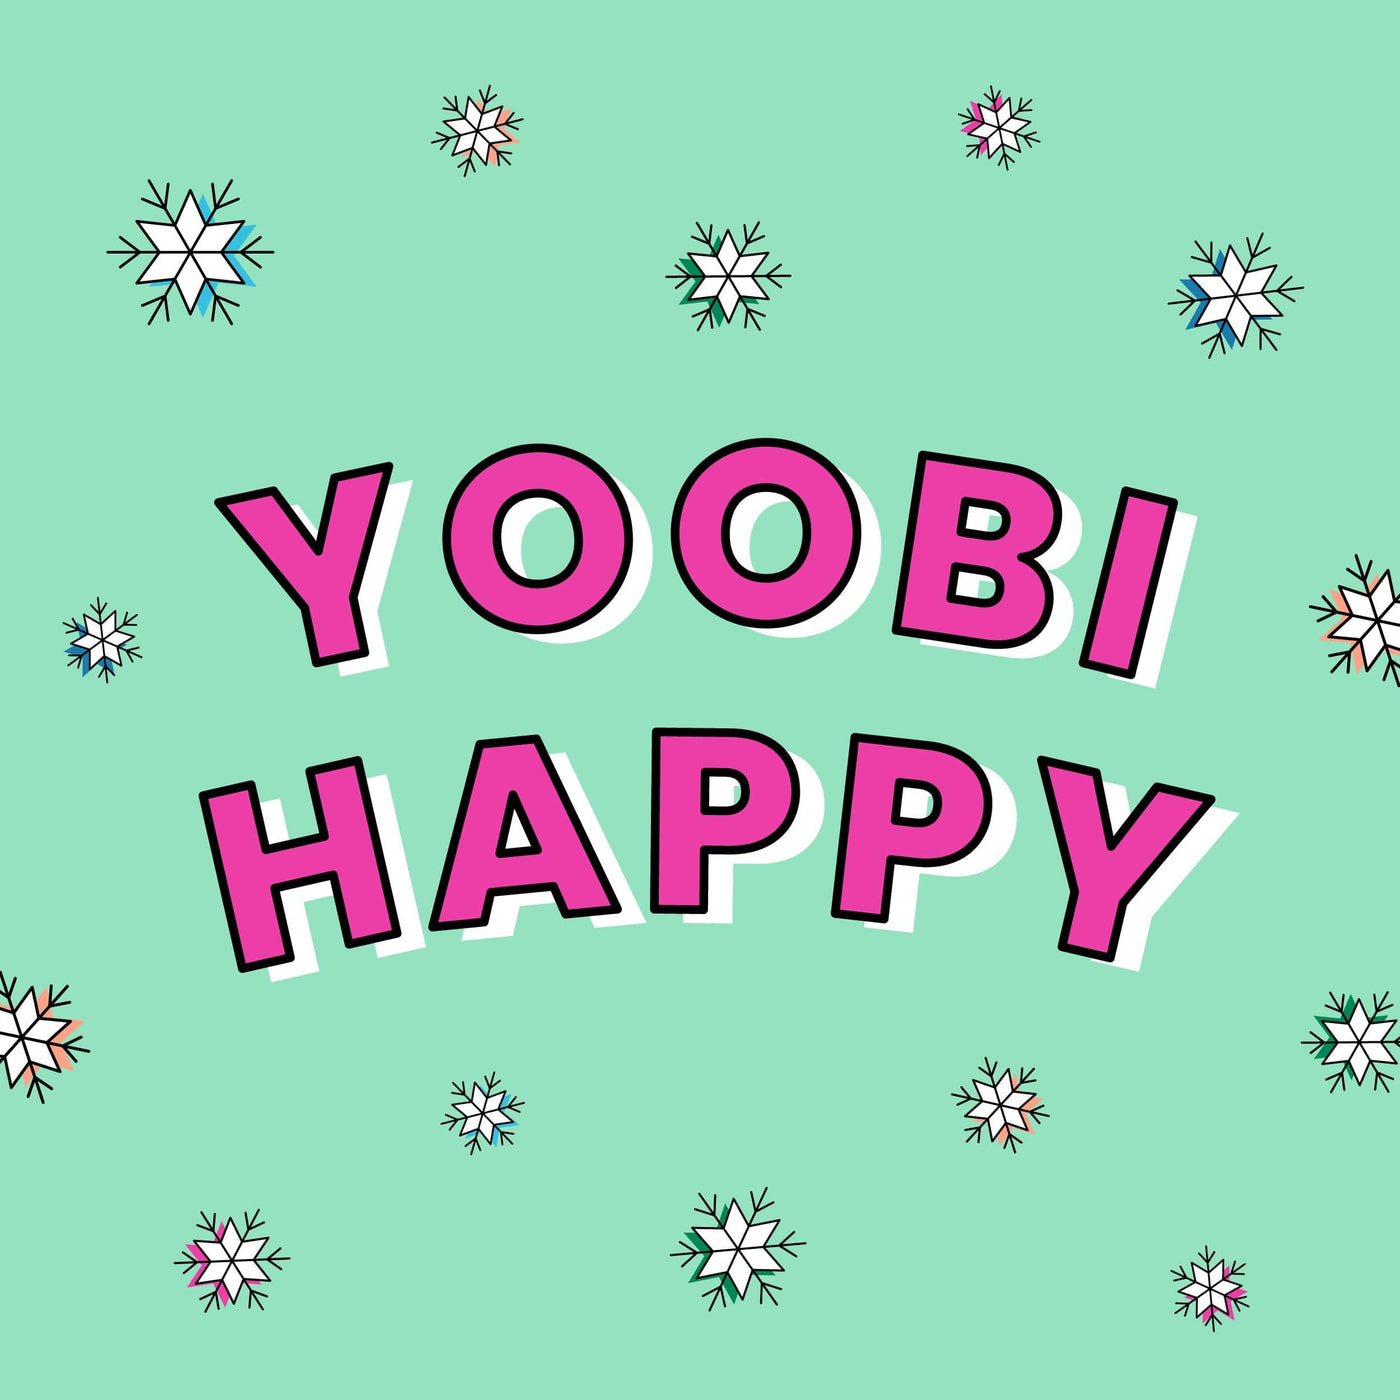 Yoobi gift card with Yoobi Happy message with snowflakes and pink lettering on mint background